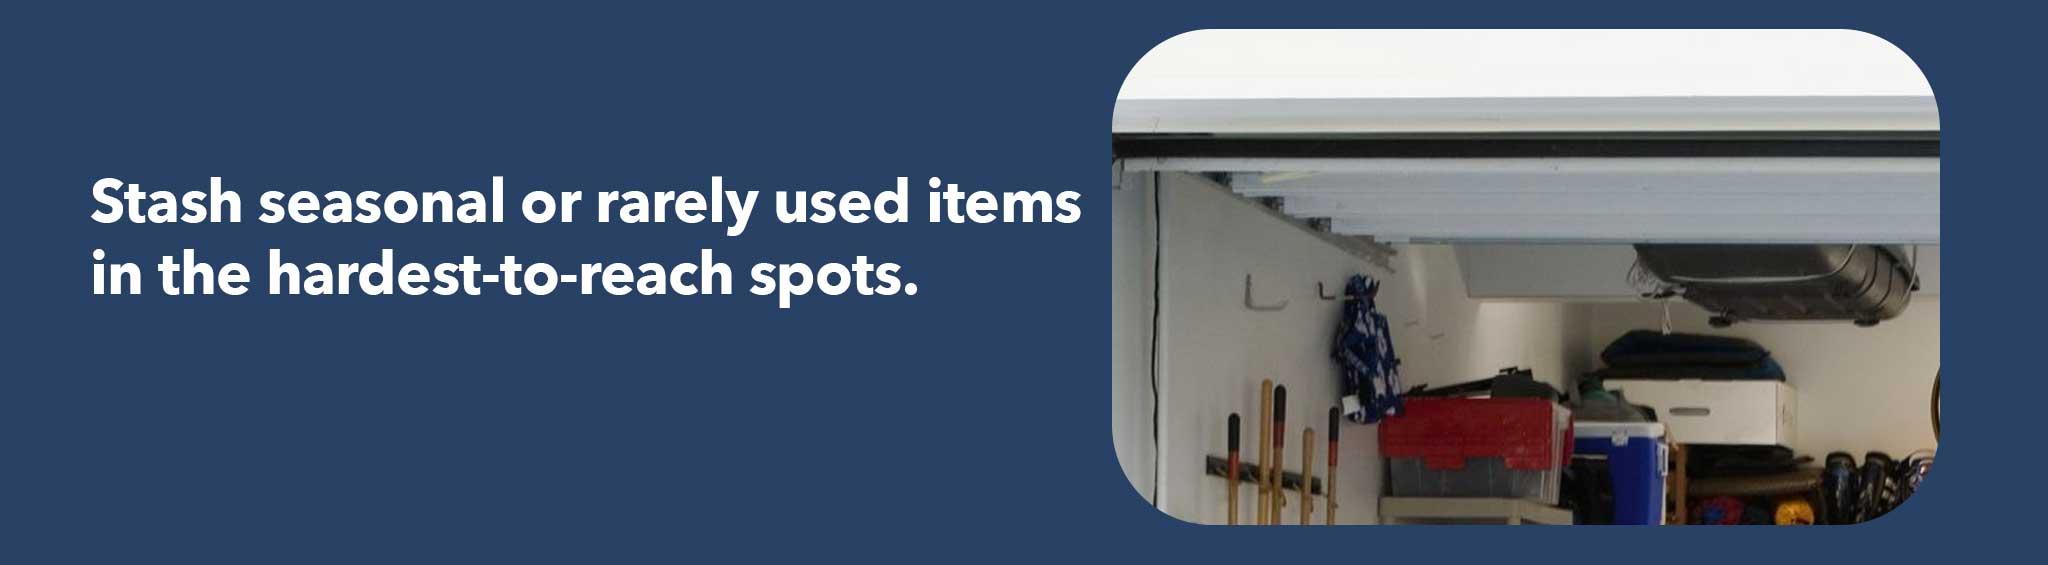 Stash seasonal or rarely used items in the hardest-to-reach spots.